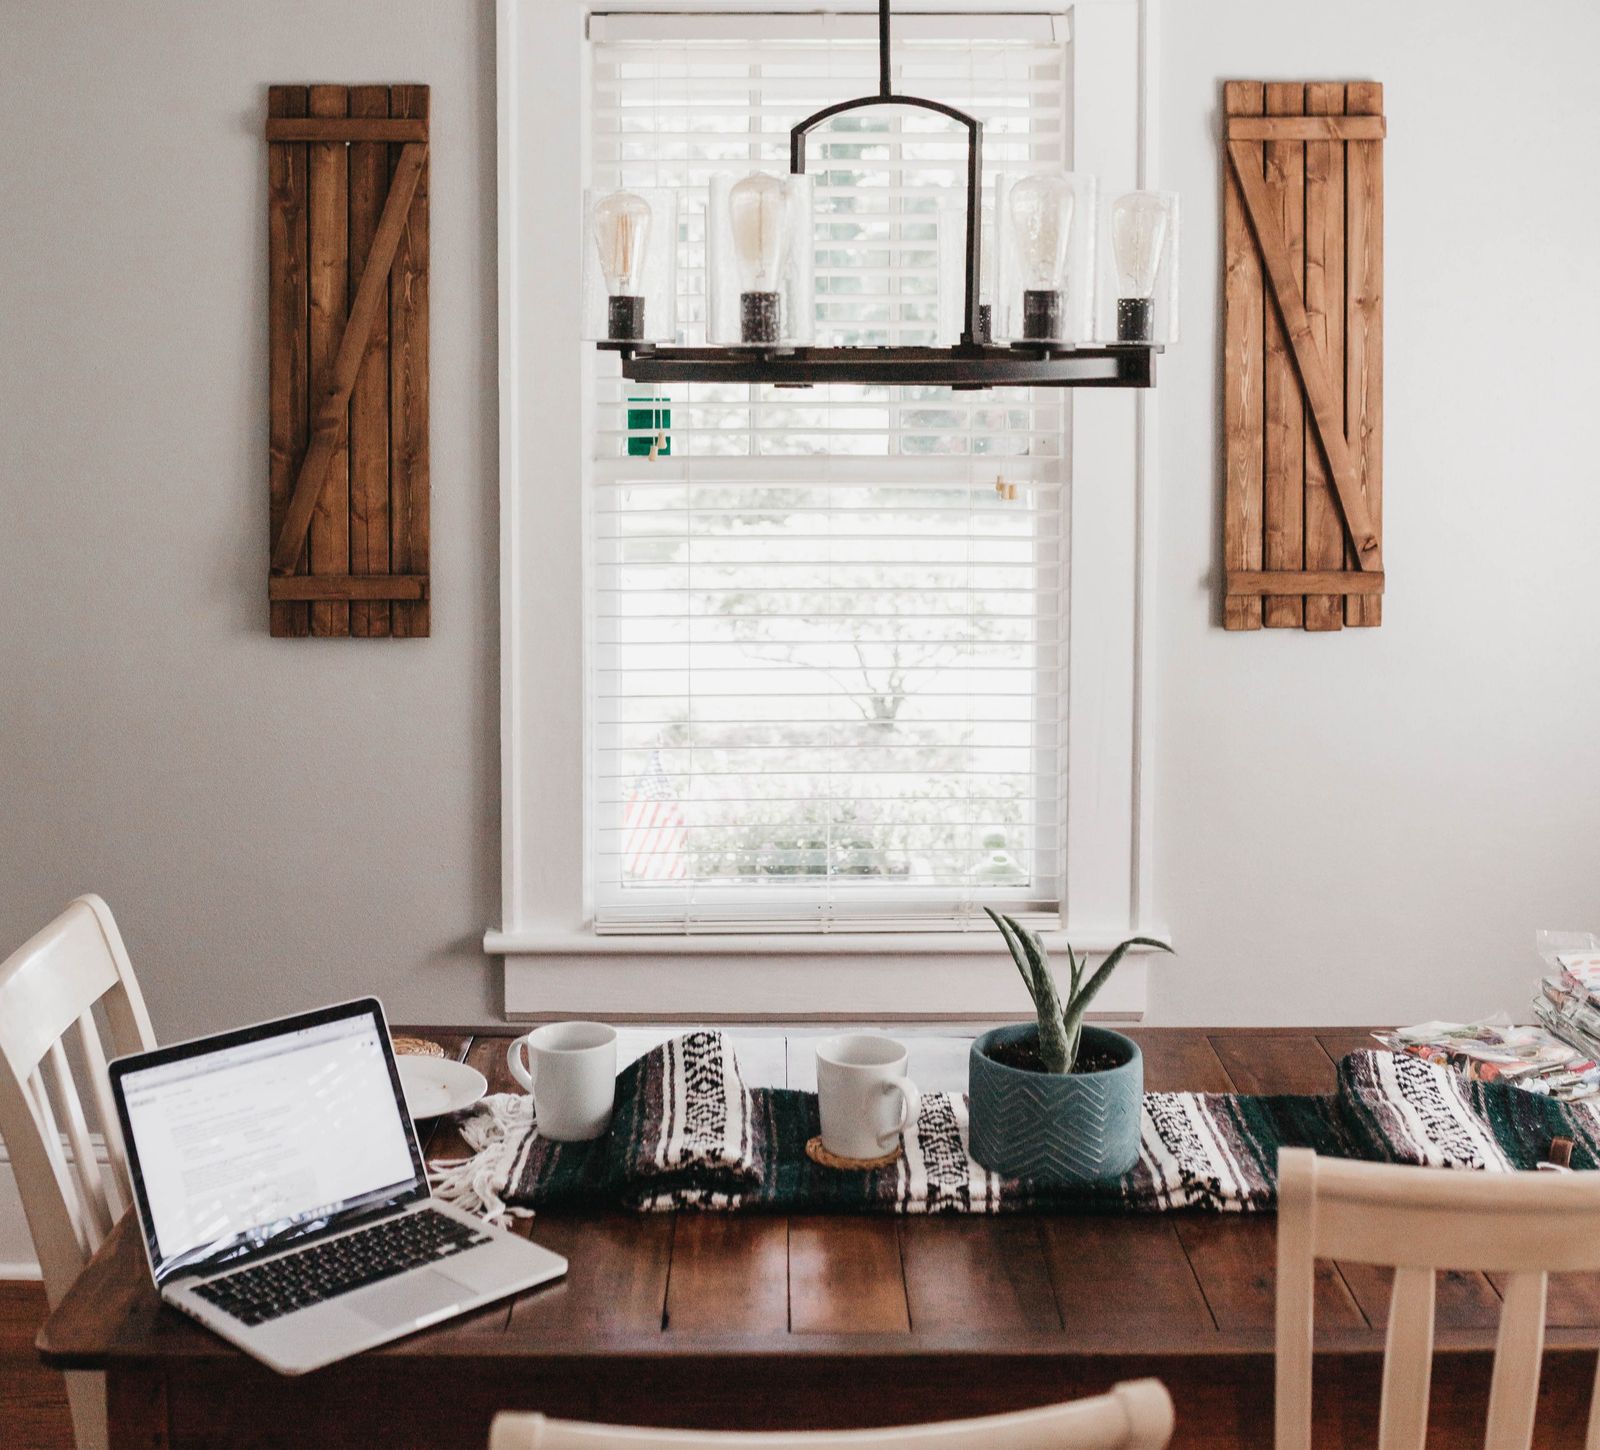 Kitchen Table CEOs blog - What Pages Do I need on my Website - Wooden table and laptop open - Camylla Battani via Unsplash